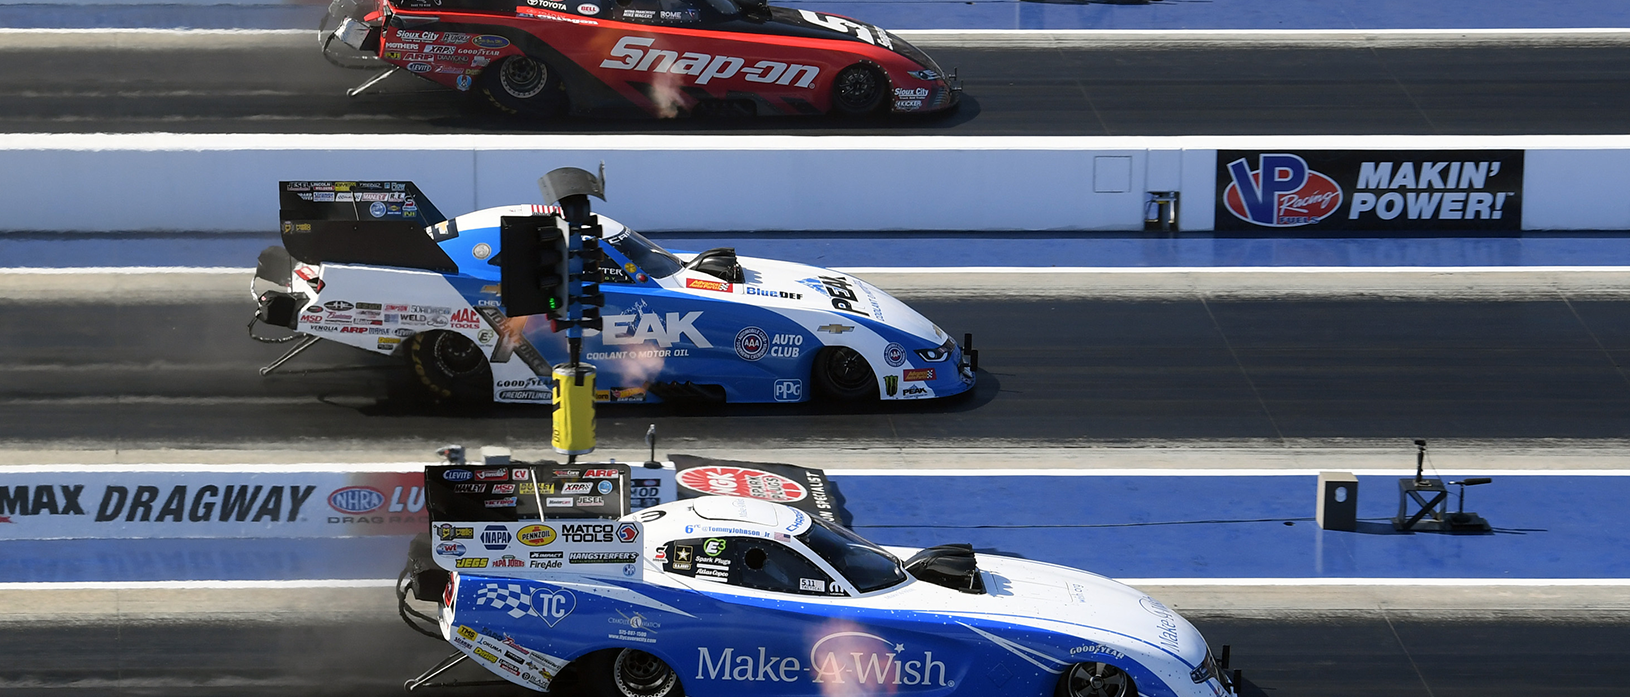 NHRA Temporarily Suspended Due to COVID-19